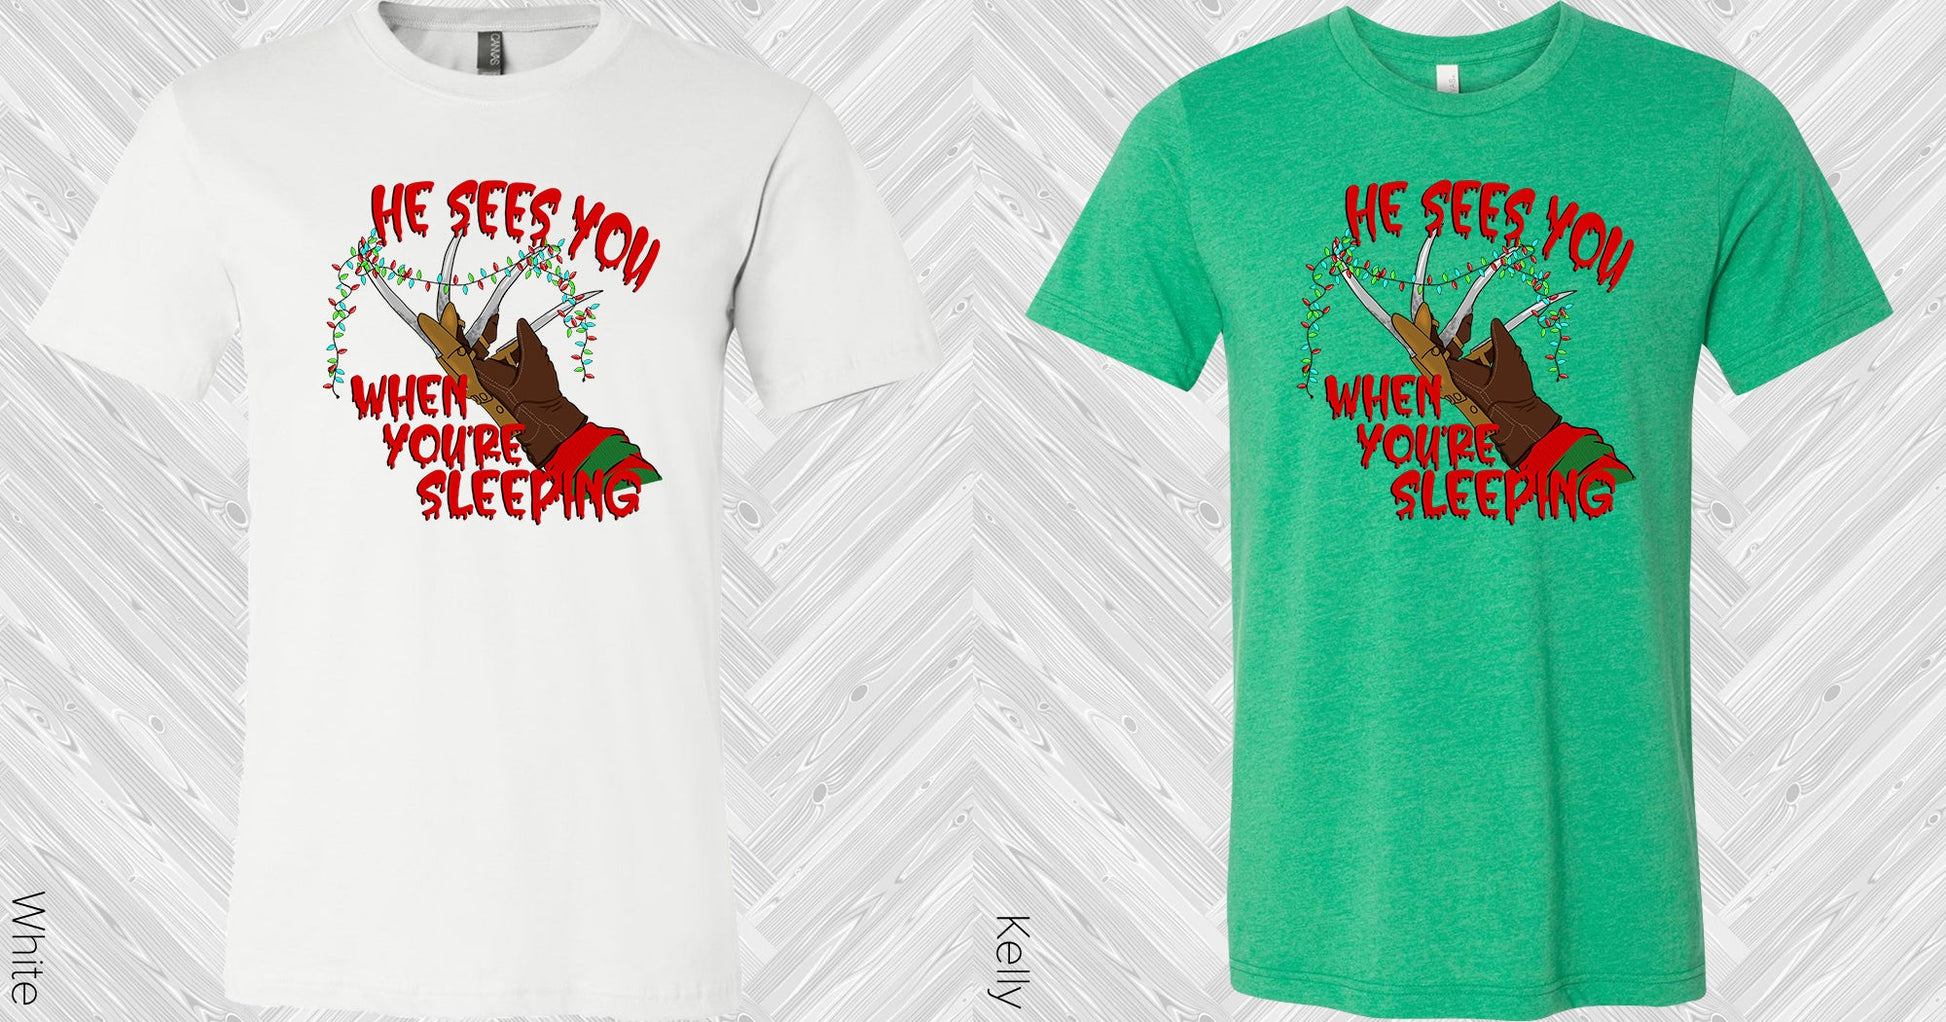 He Sees You When Youre Sleeping Graphic Tee Graphic Tee